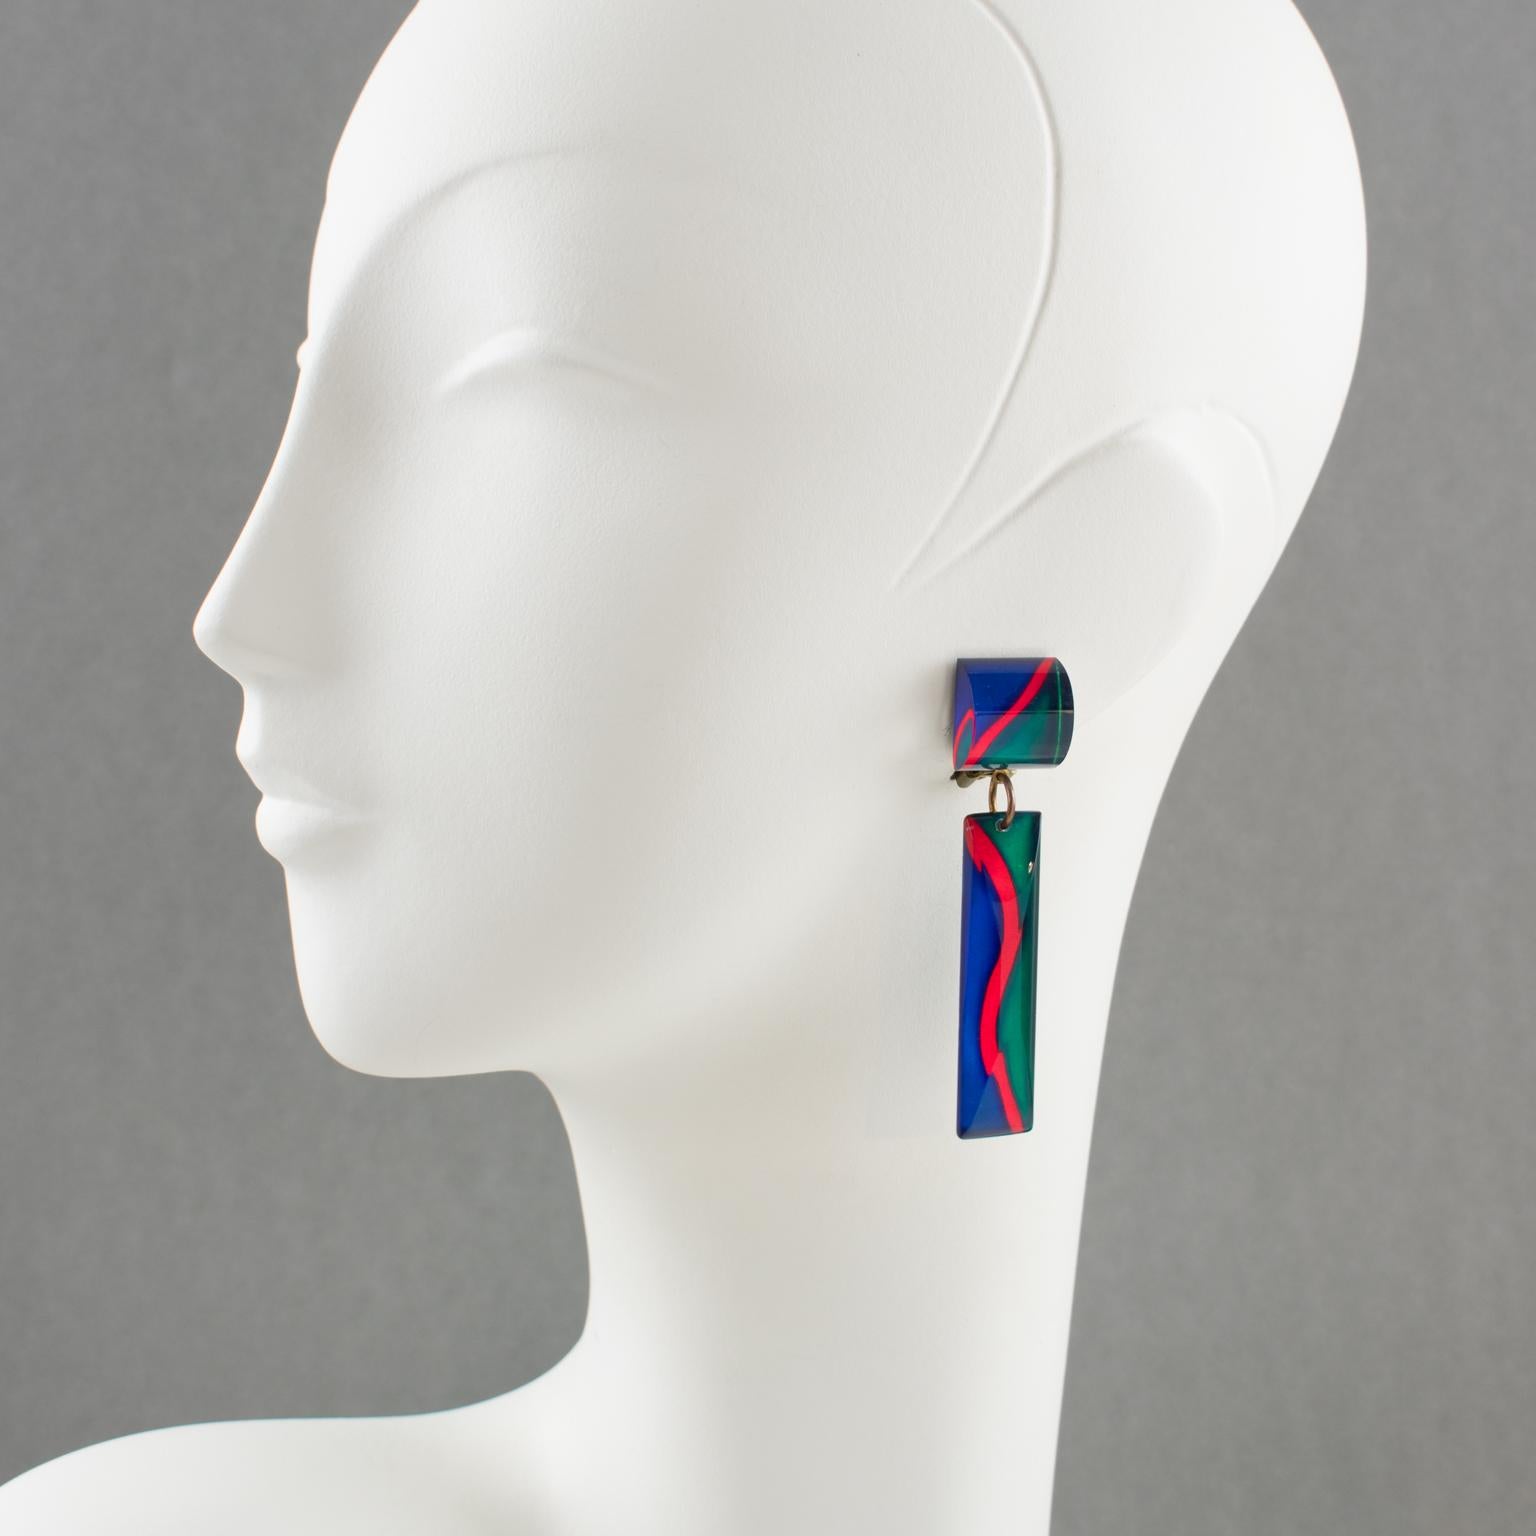 Stunning dangling Lucite clip-on earrings, featuring a geometric domed shape with an unusual zig-zag inclusion pattern. Assorted colors of electric red, cobalt blue, and bright turquoise green. No visible maker's mark.
Measurements: 2.75 in. long (7